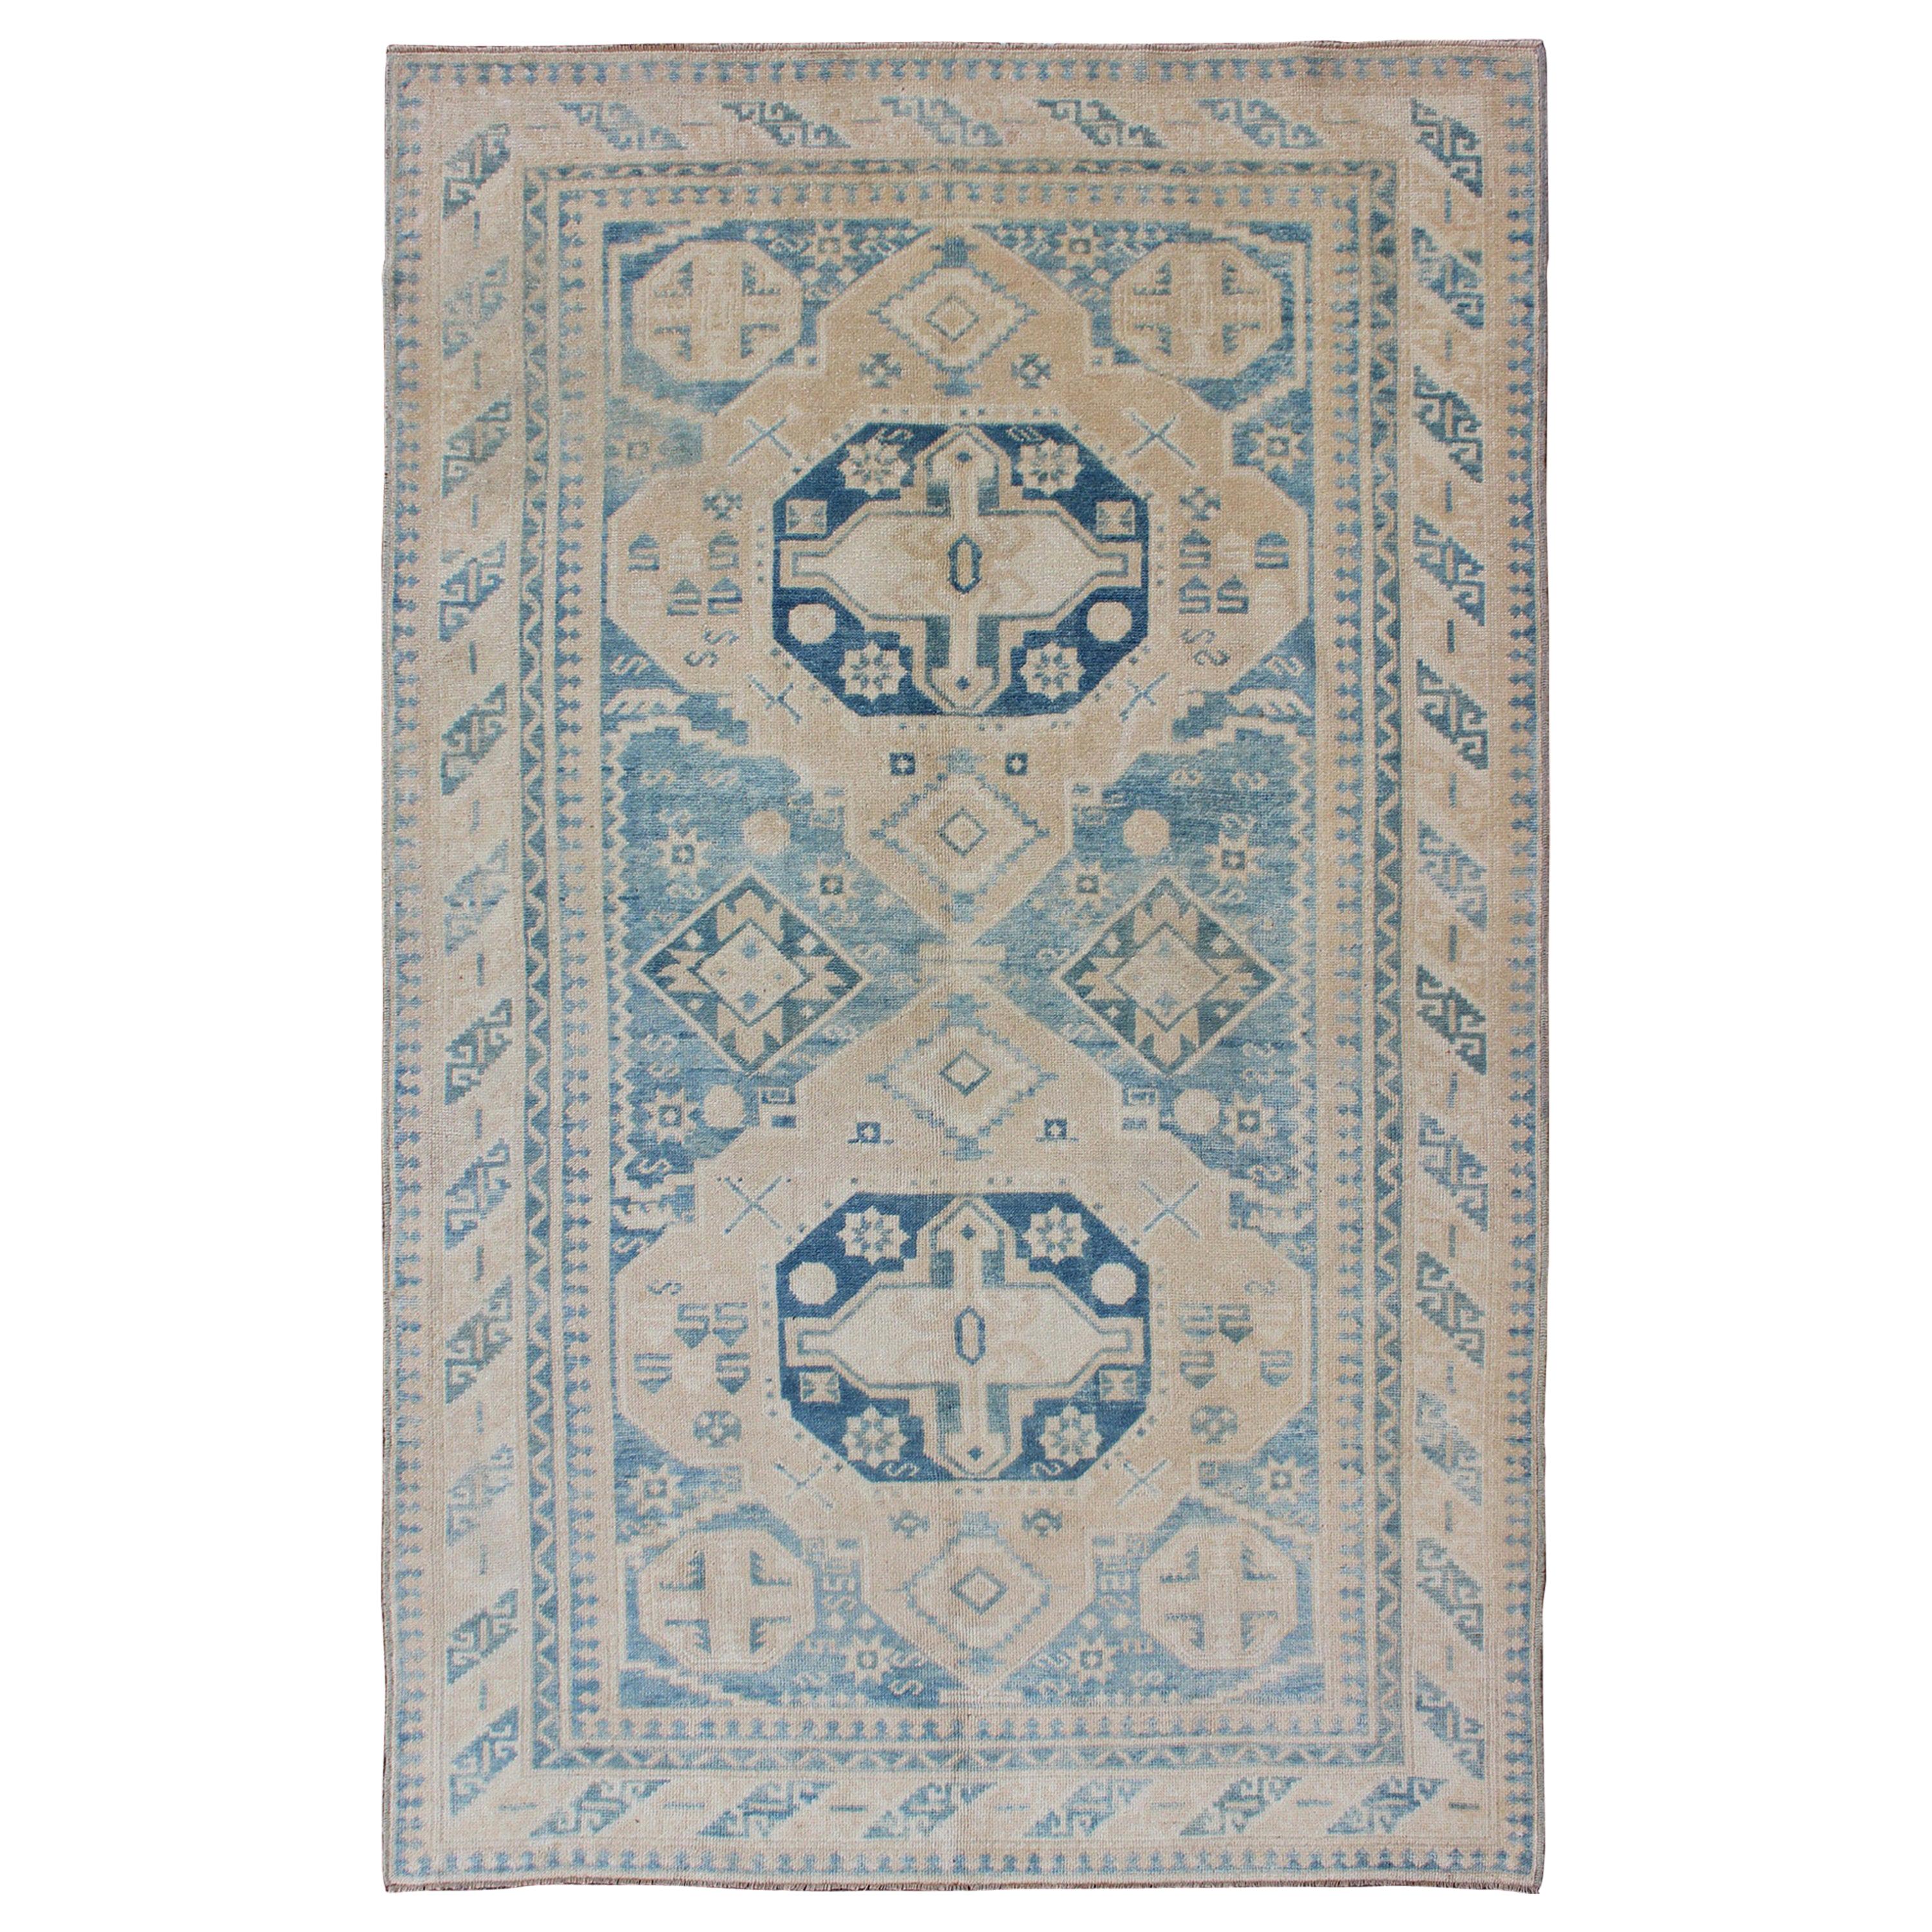 Blue and Tan Vintage Turkish Oushak Rug with Geometric Dual Medallions For Sale